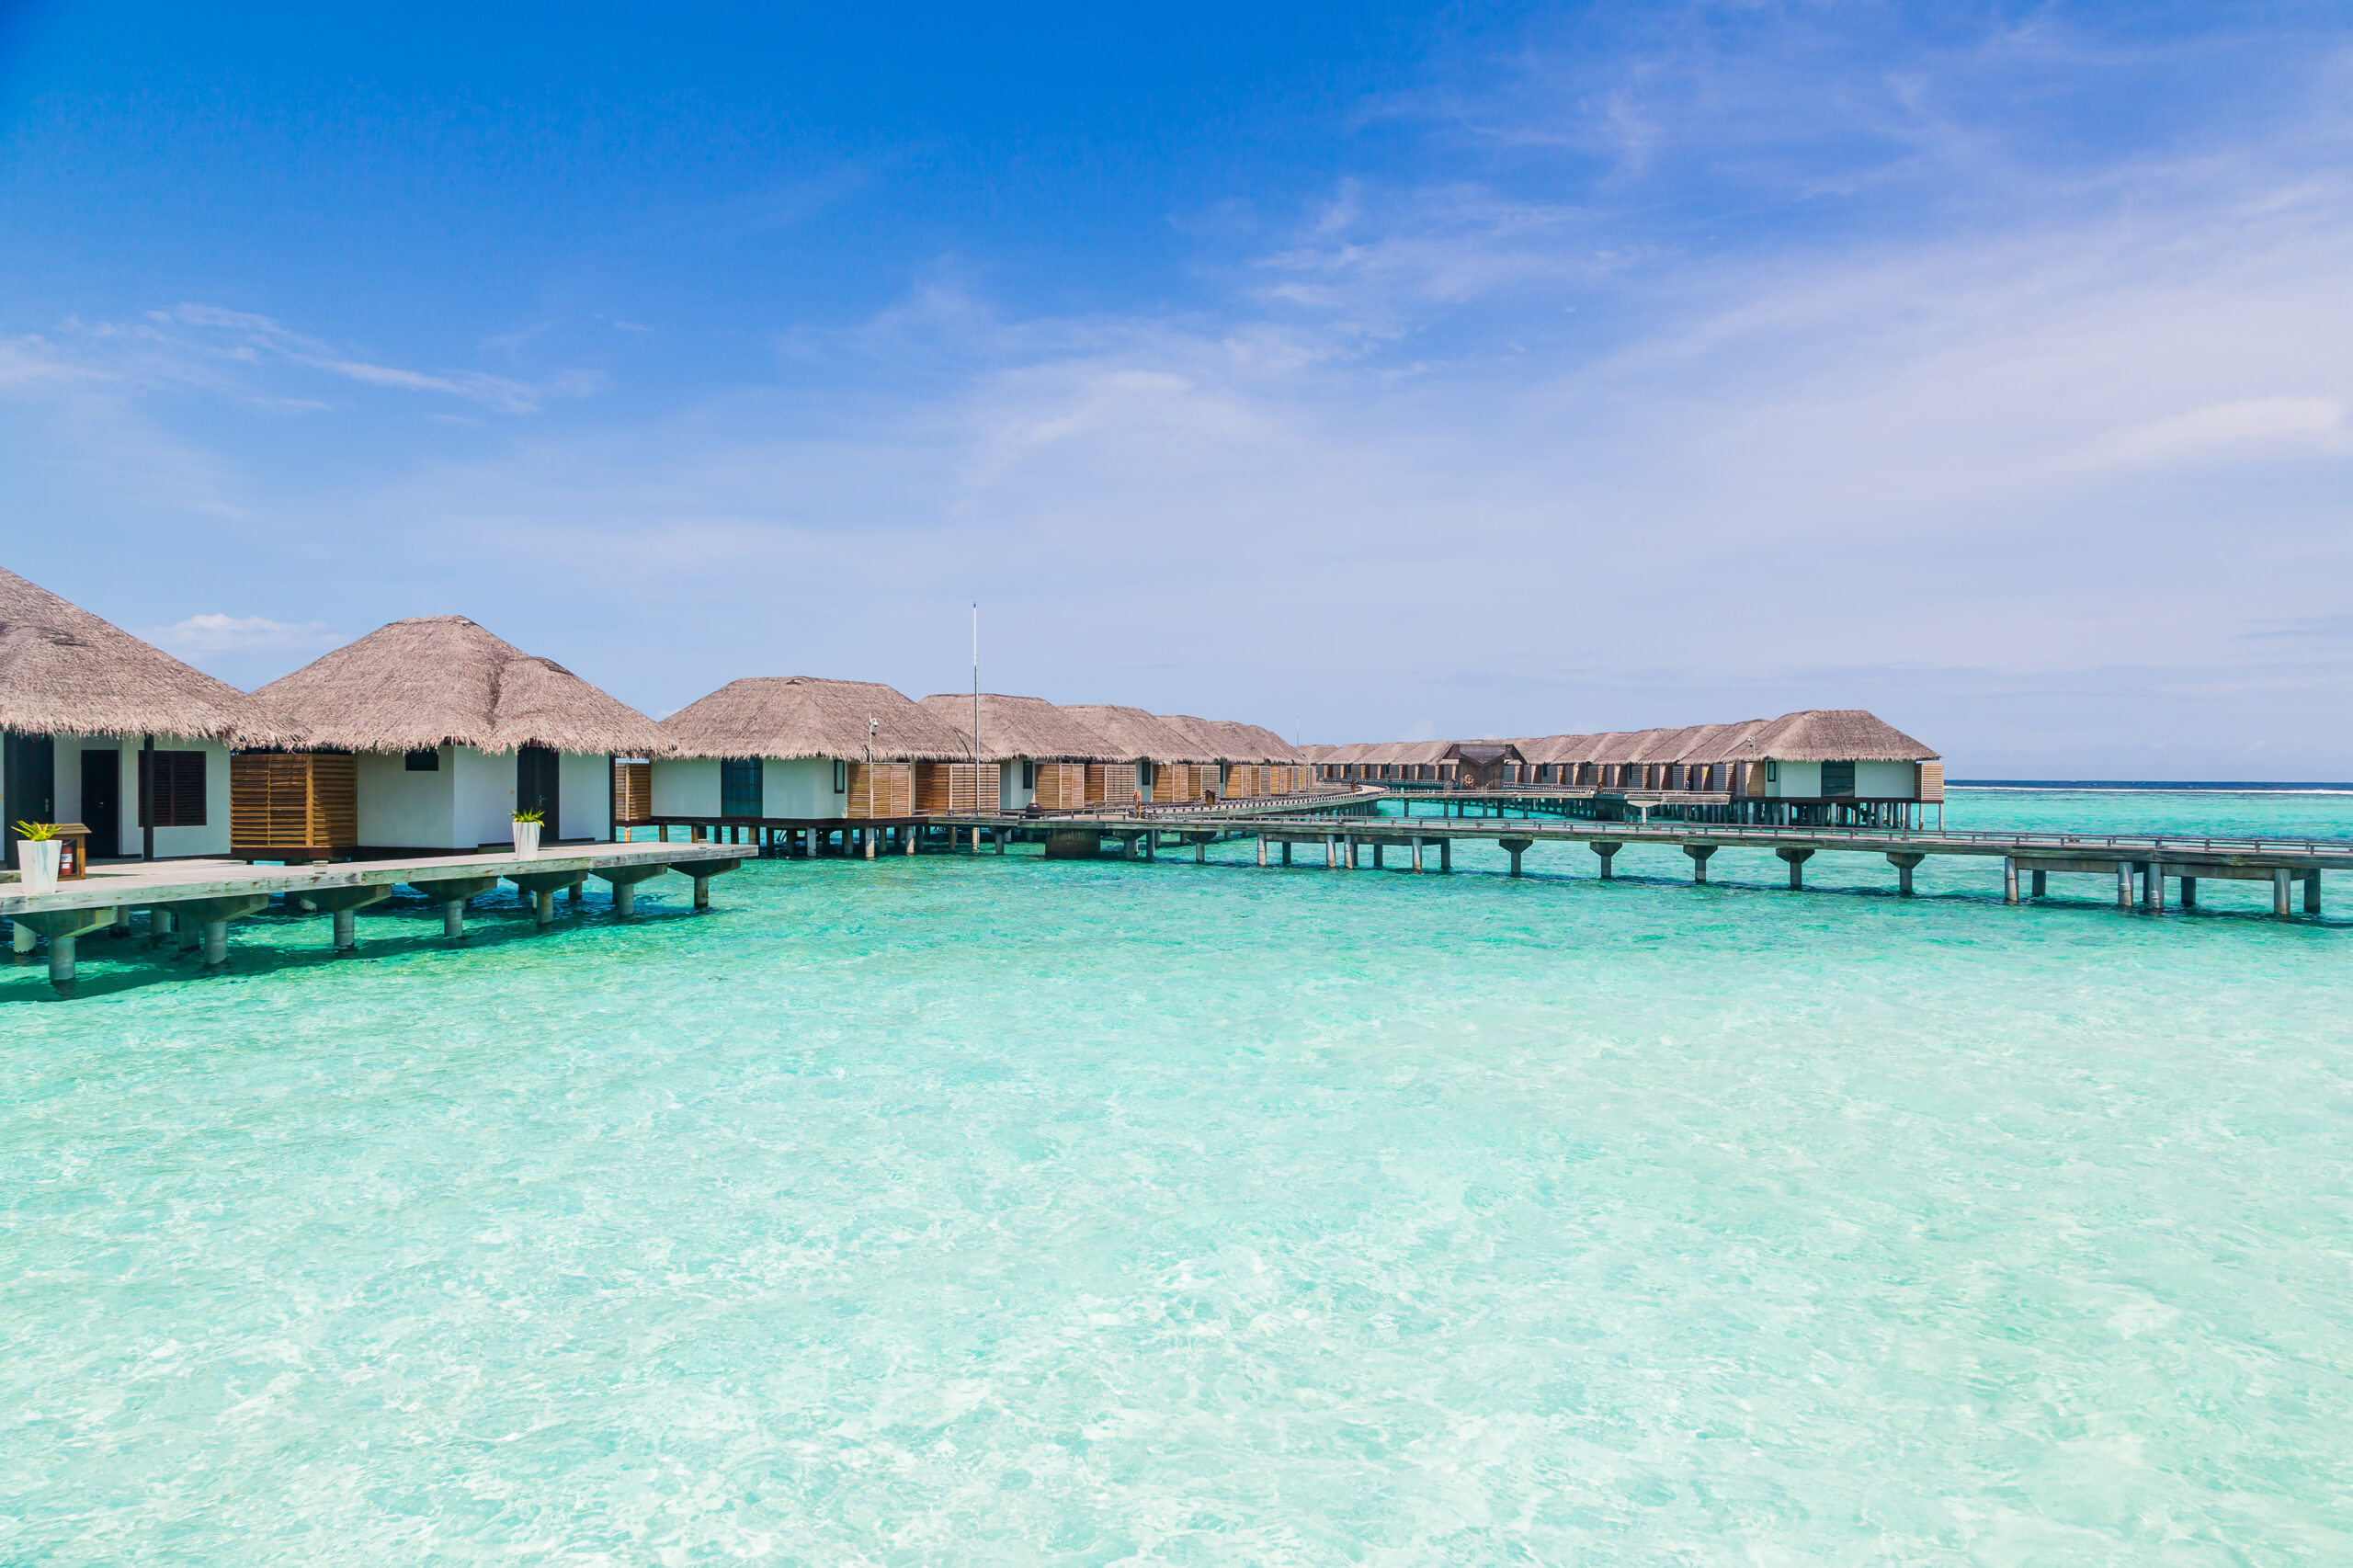 The Best Time to Visit the Maldives: Weather and Travel Tips